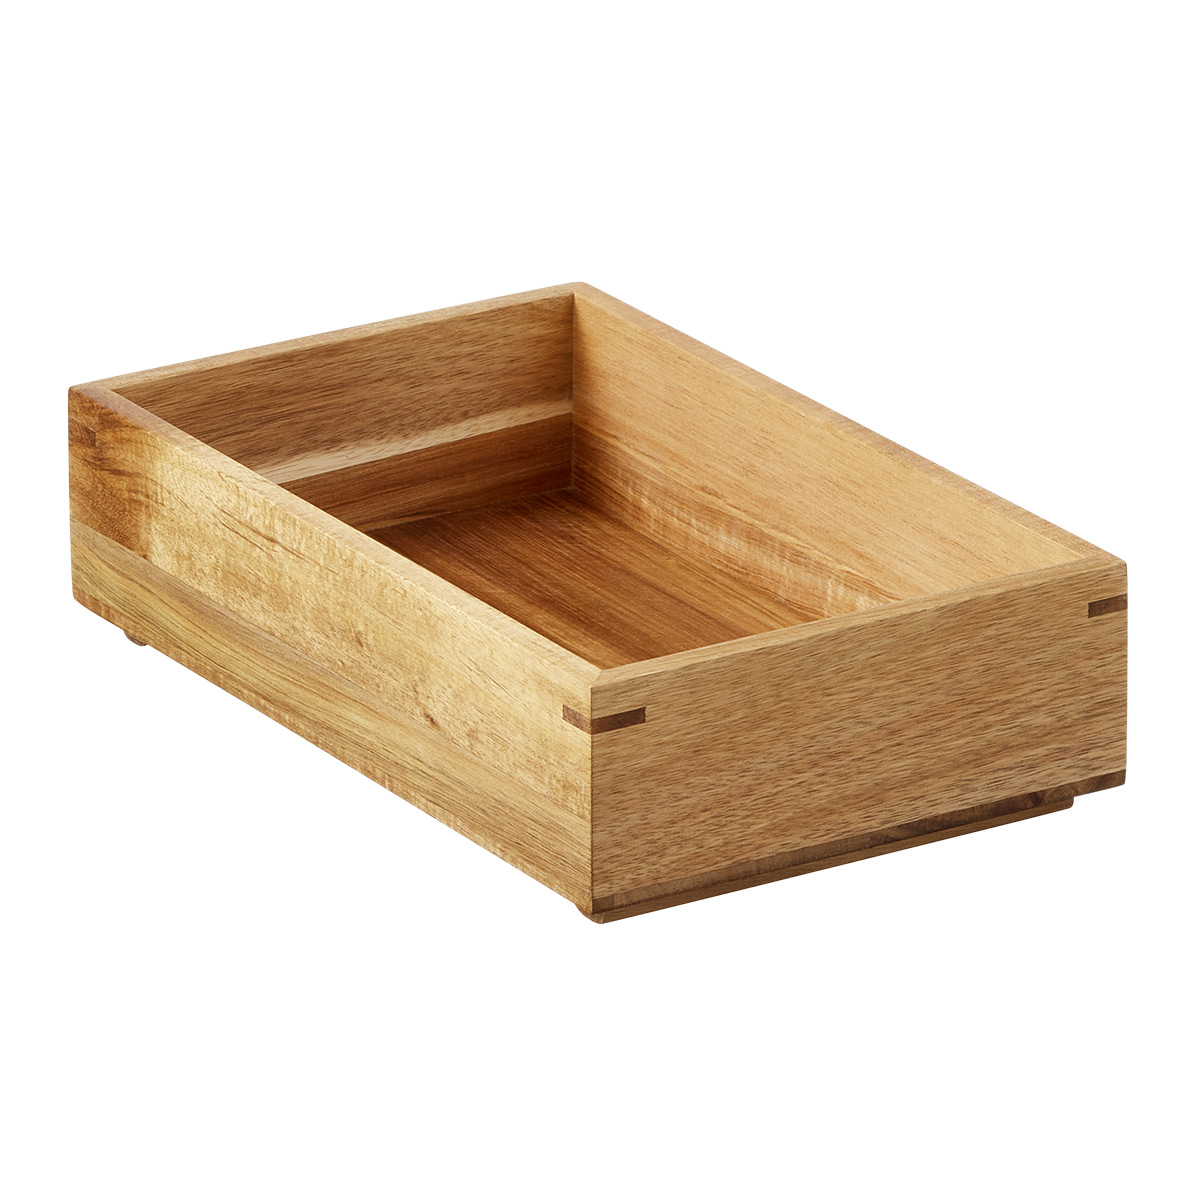 https://www.containerstore.com/catalogimages/474940/10091156-rowan-acacia-stacking-acces.jpg